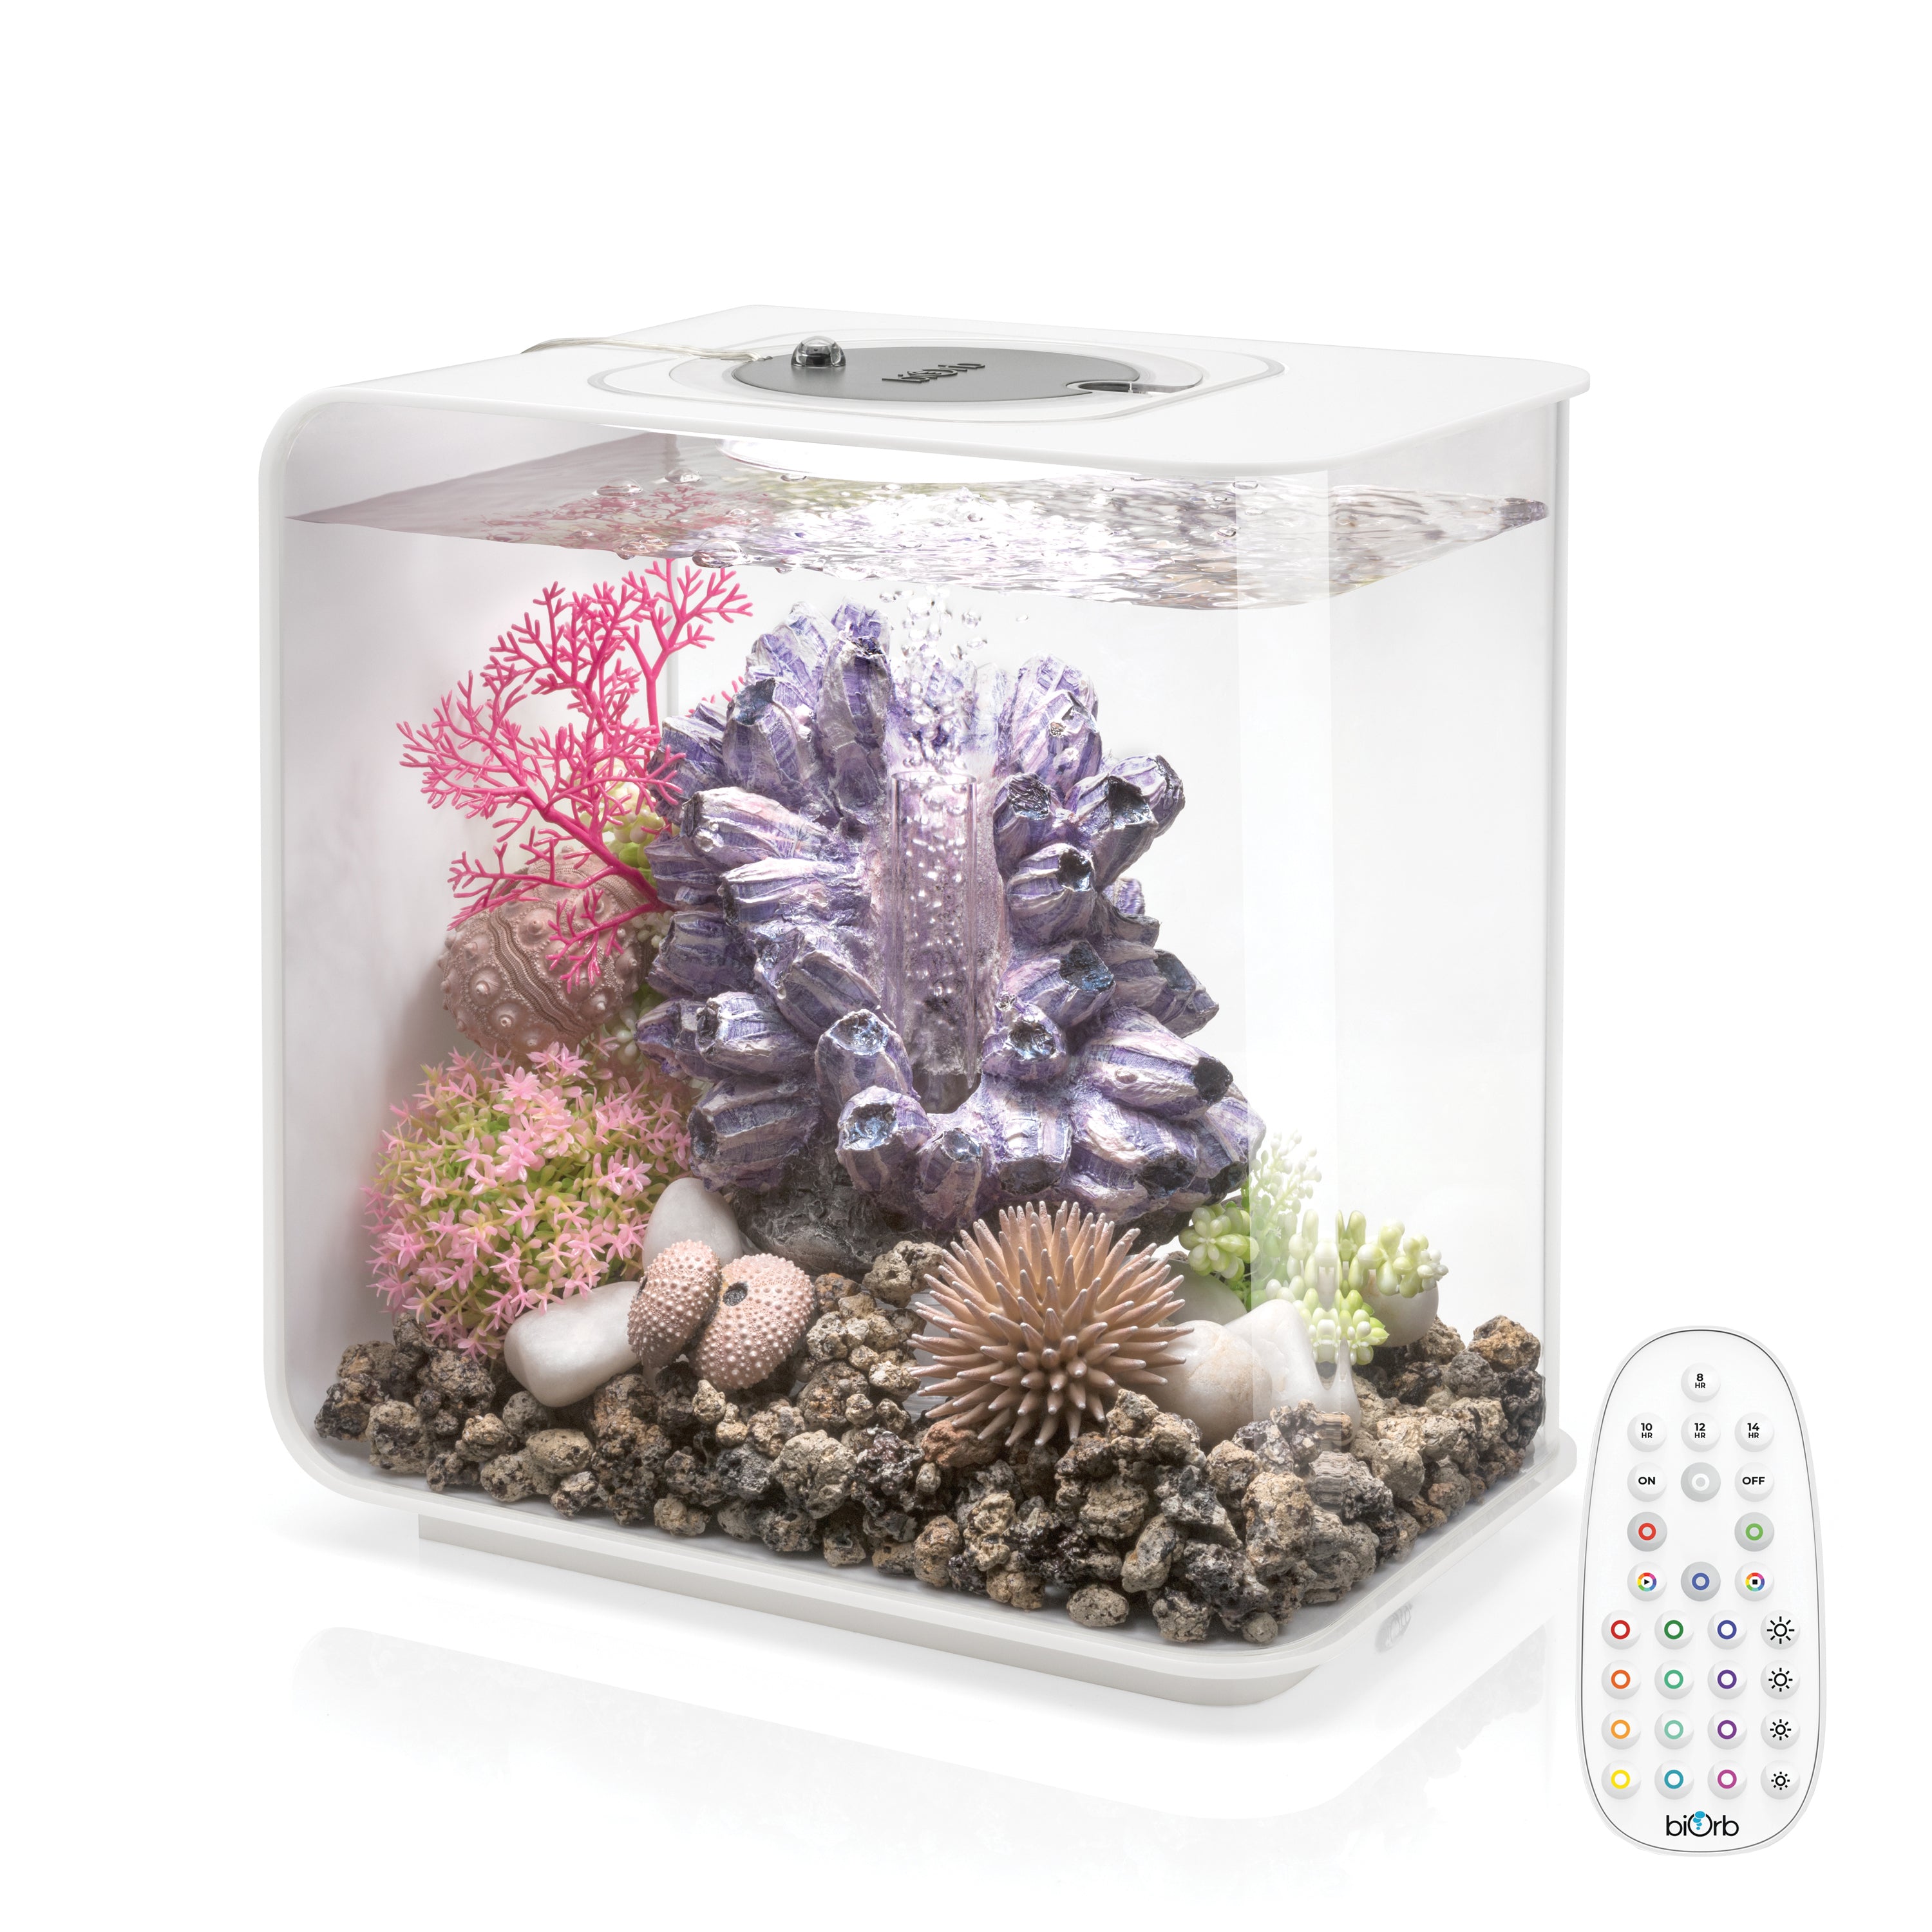 FLOW 15 Aquarium with MCR Light - 4 gallon available in white